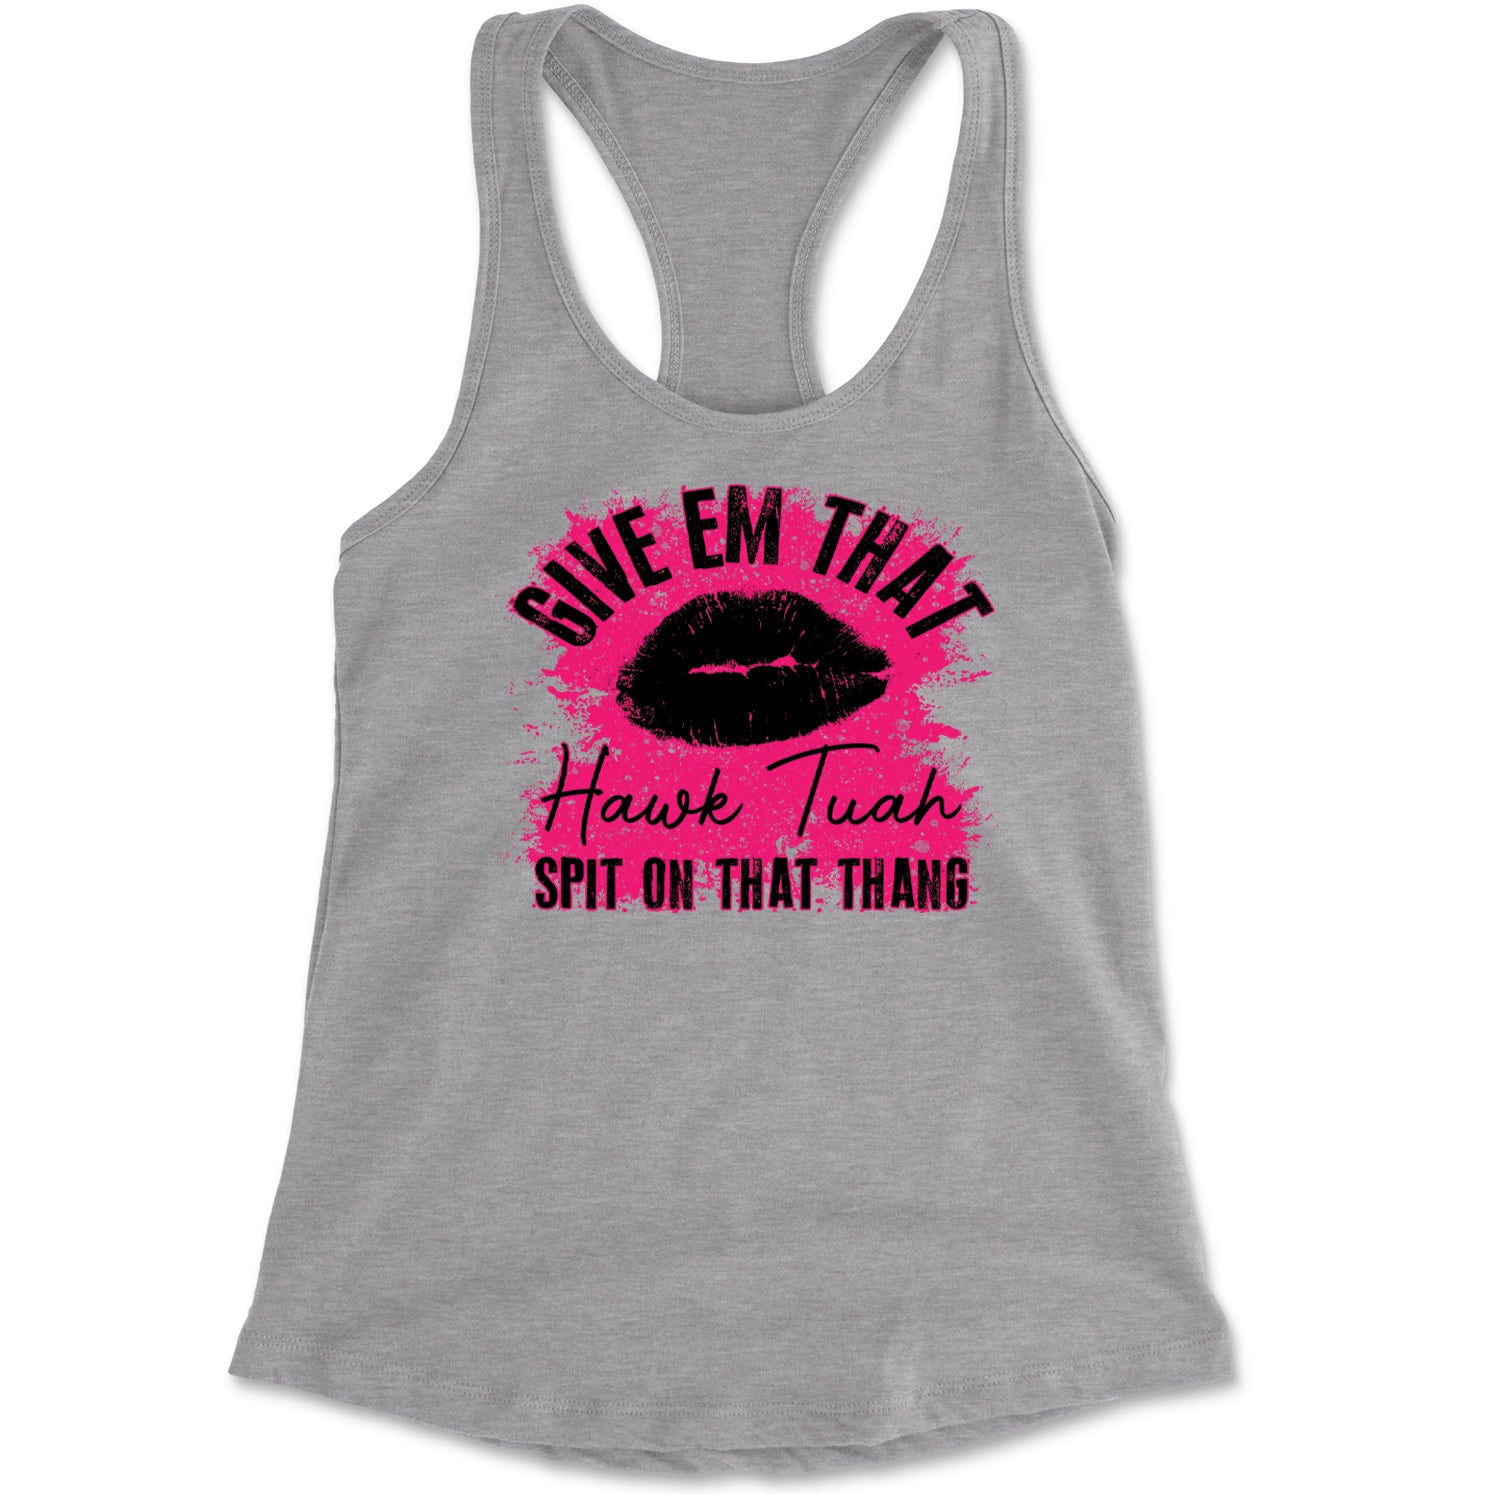 Give 'Em Hawk Tuah Spit On That Thang Racerback Tank Top for Women Heather Grey